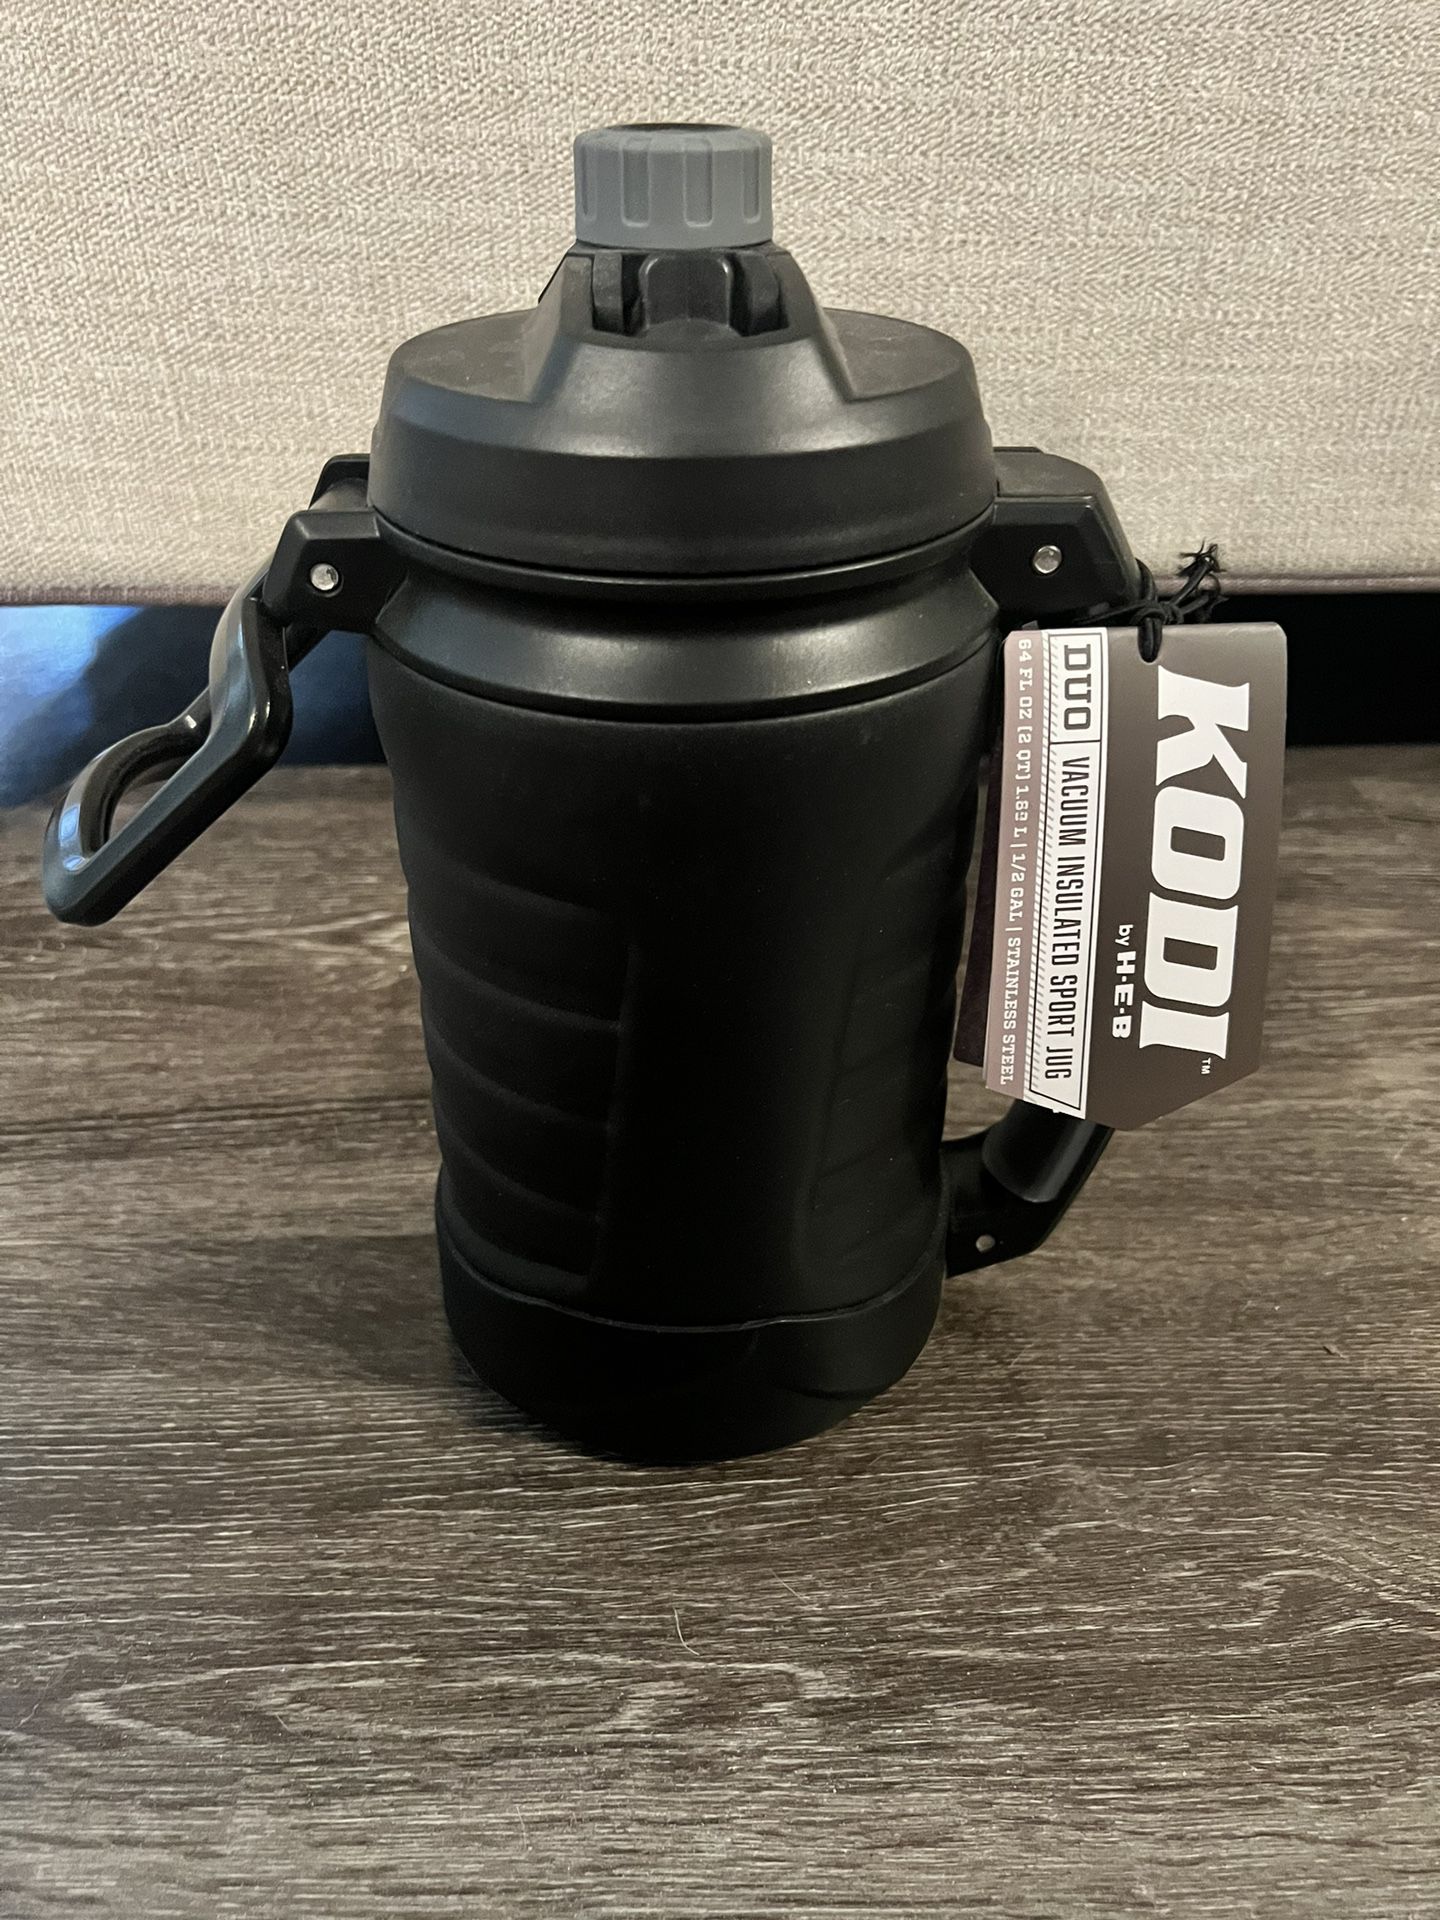 KODI by H-E-B Stainless Steel Duo Sport Jug - Shop Travel & To-Go at H-E-B